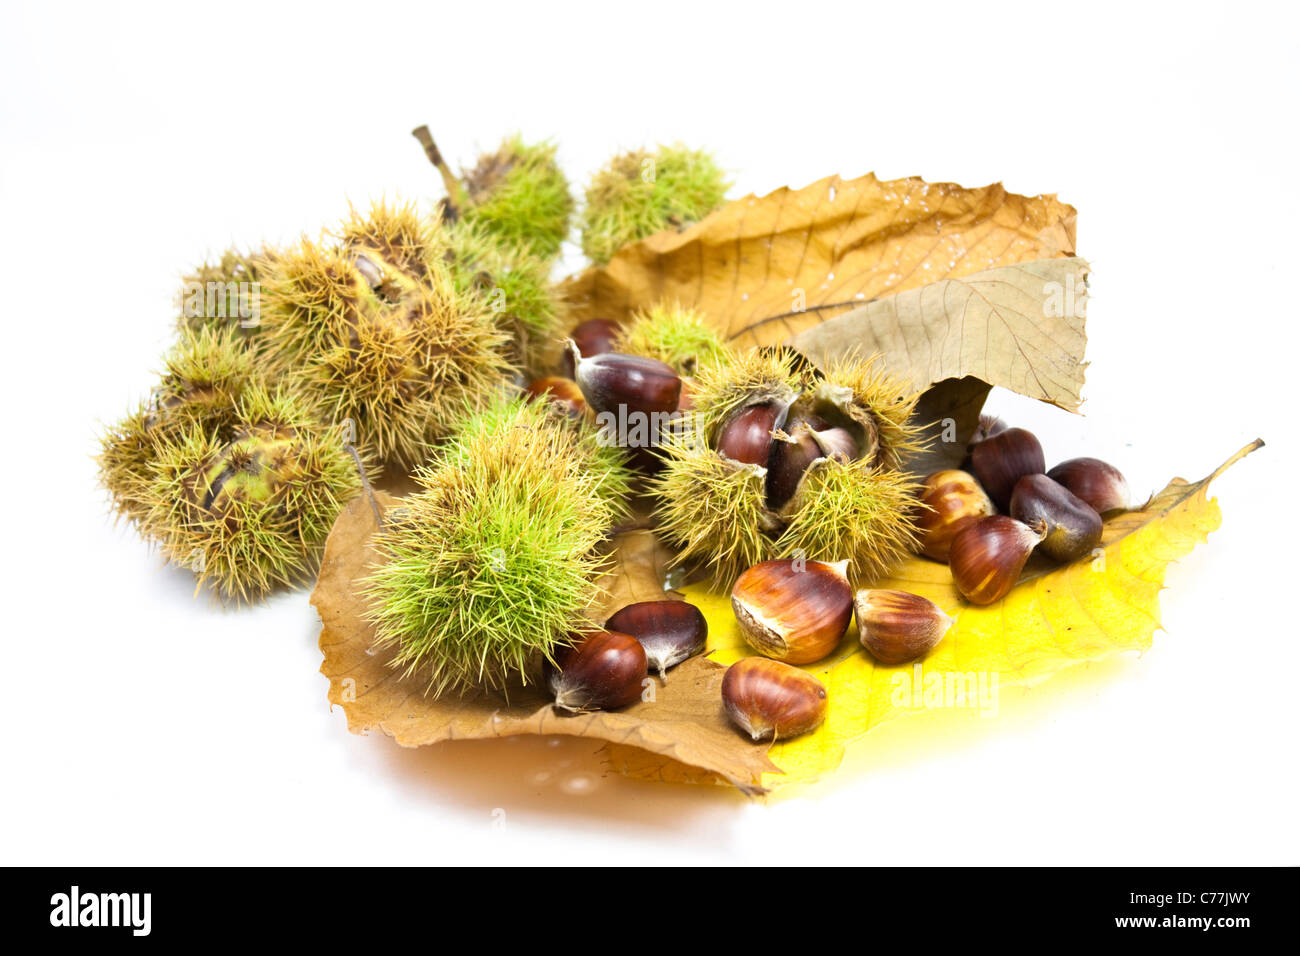 chestnuts shot on a white background, group shot Stock Photo